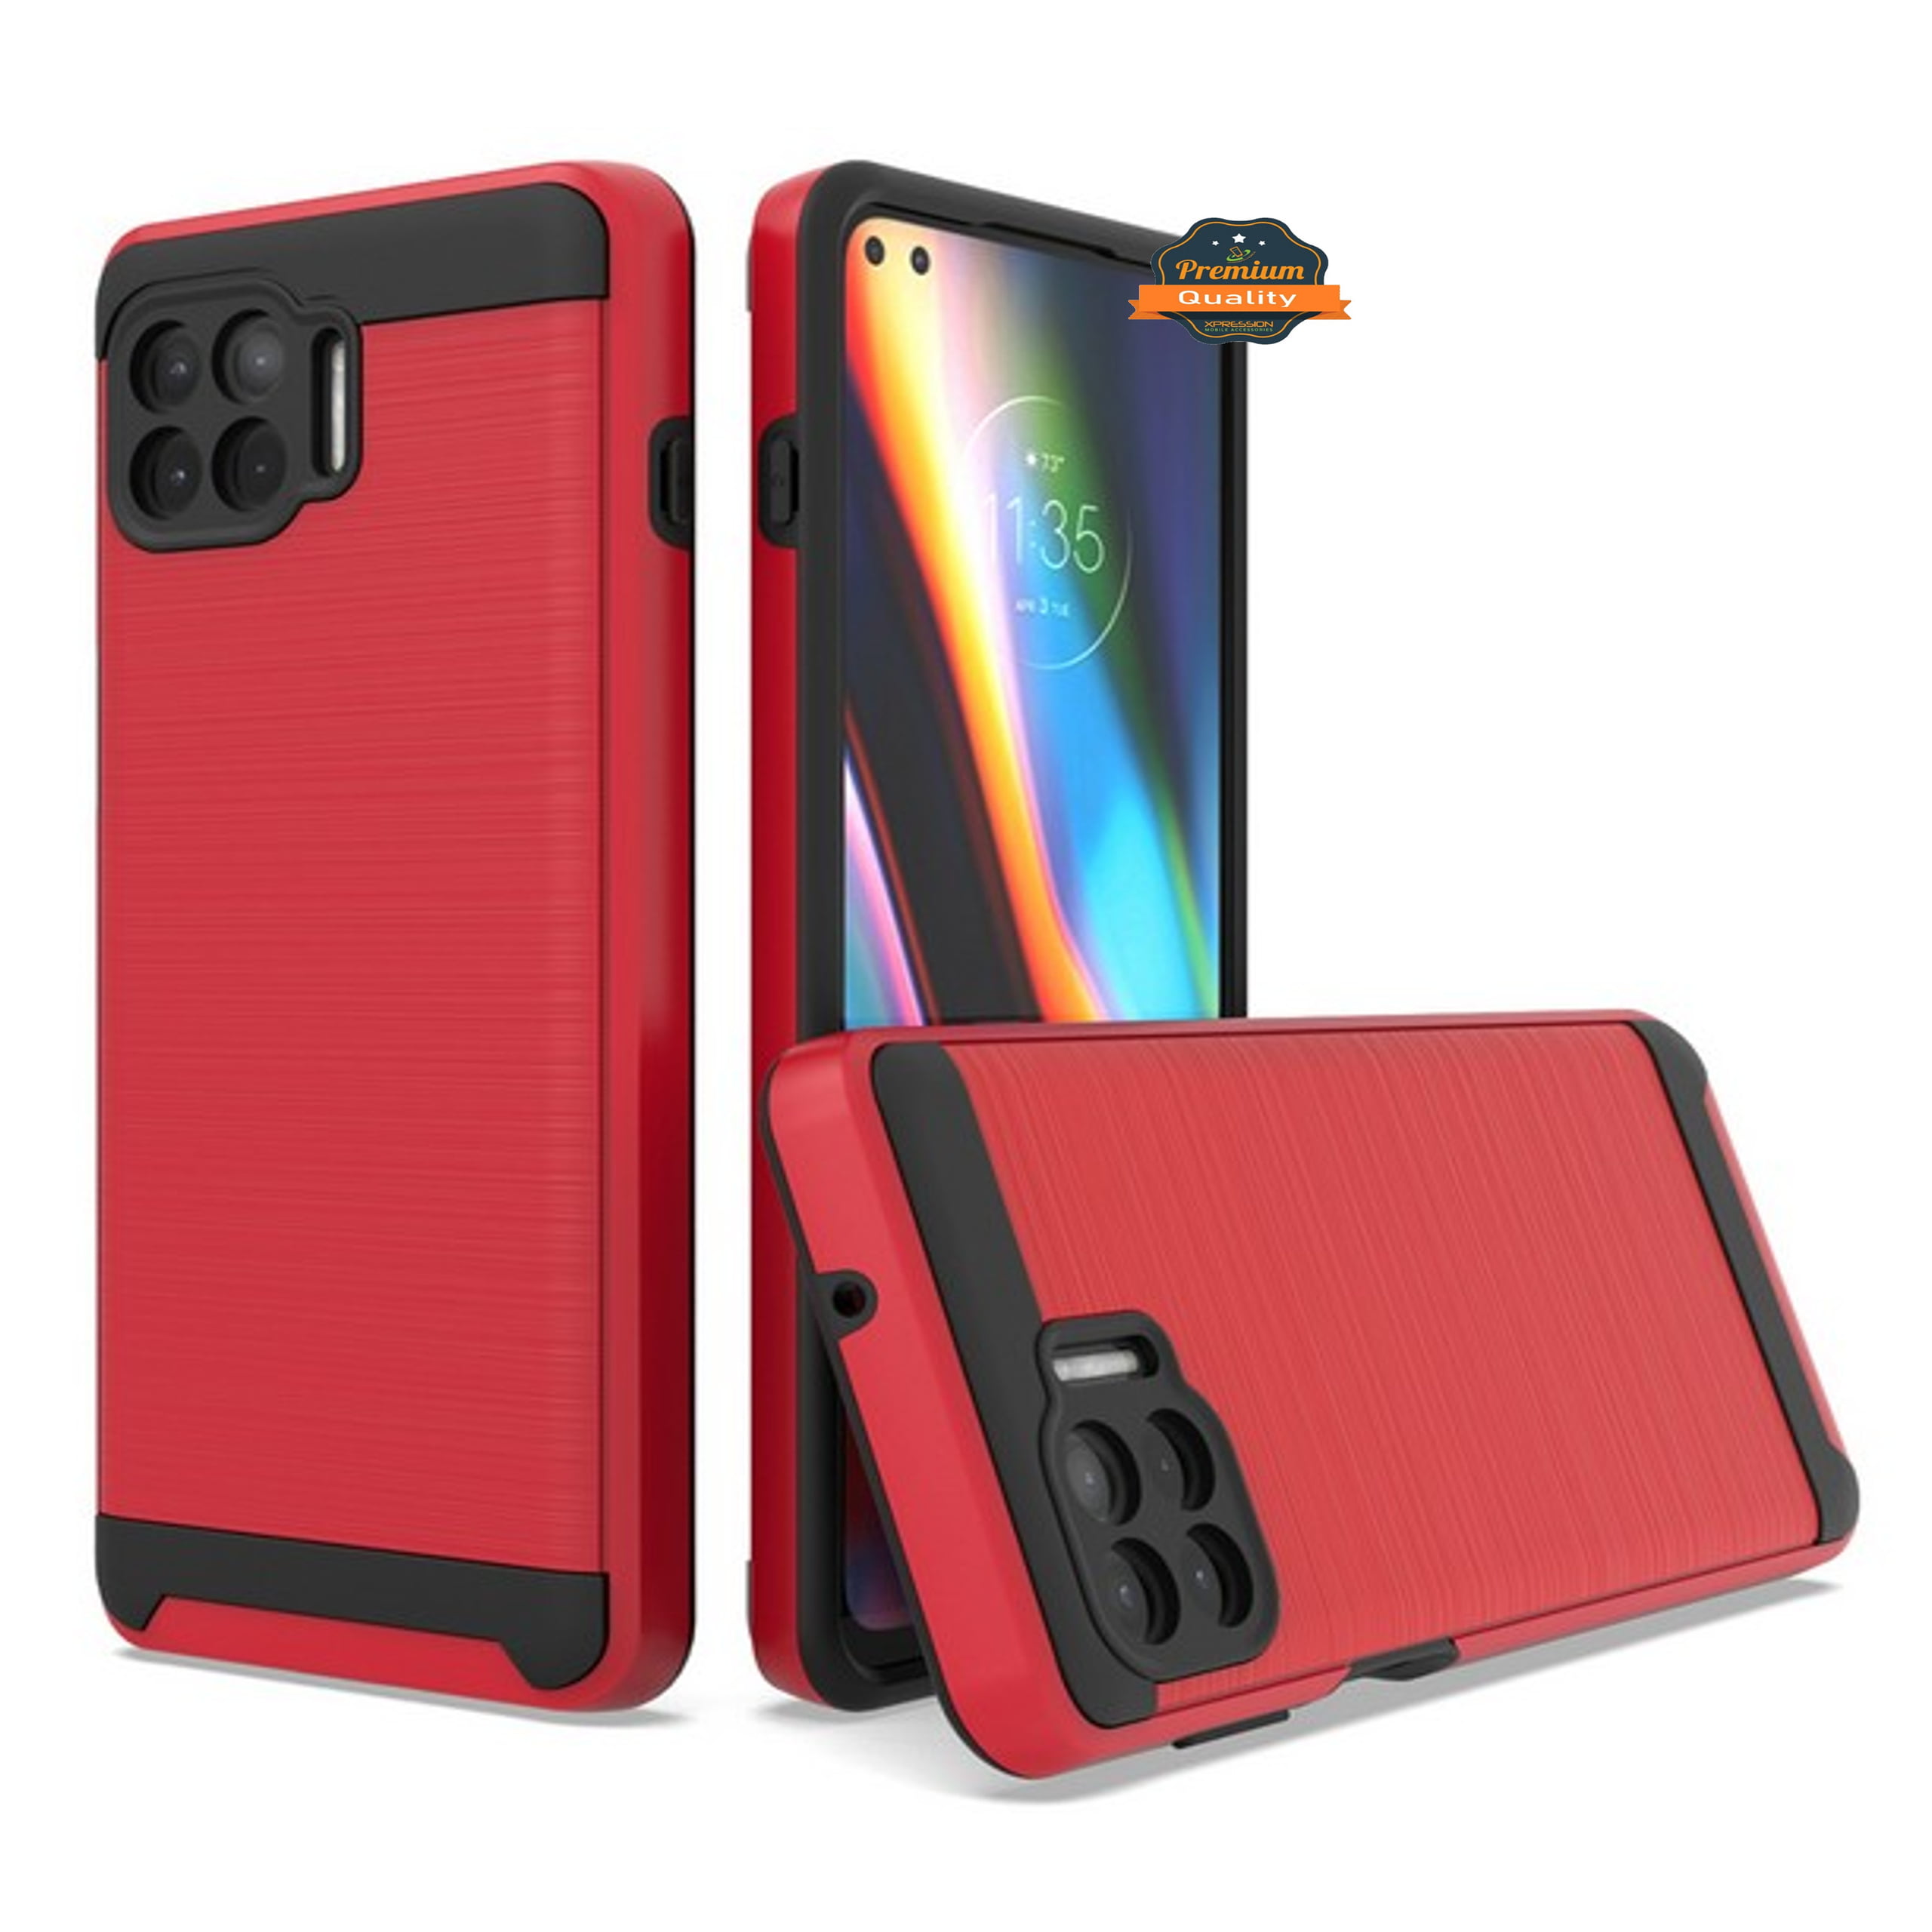 For Motorola Moto One 5G, Moto G 5G Plus Rugged TPU + Hard PC Brushed Metal Texture Hybrid Dual Layer Shockproof Phone Case Cover by Xpression [Red] - Walmart.com